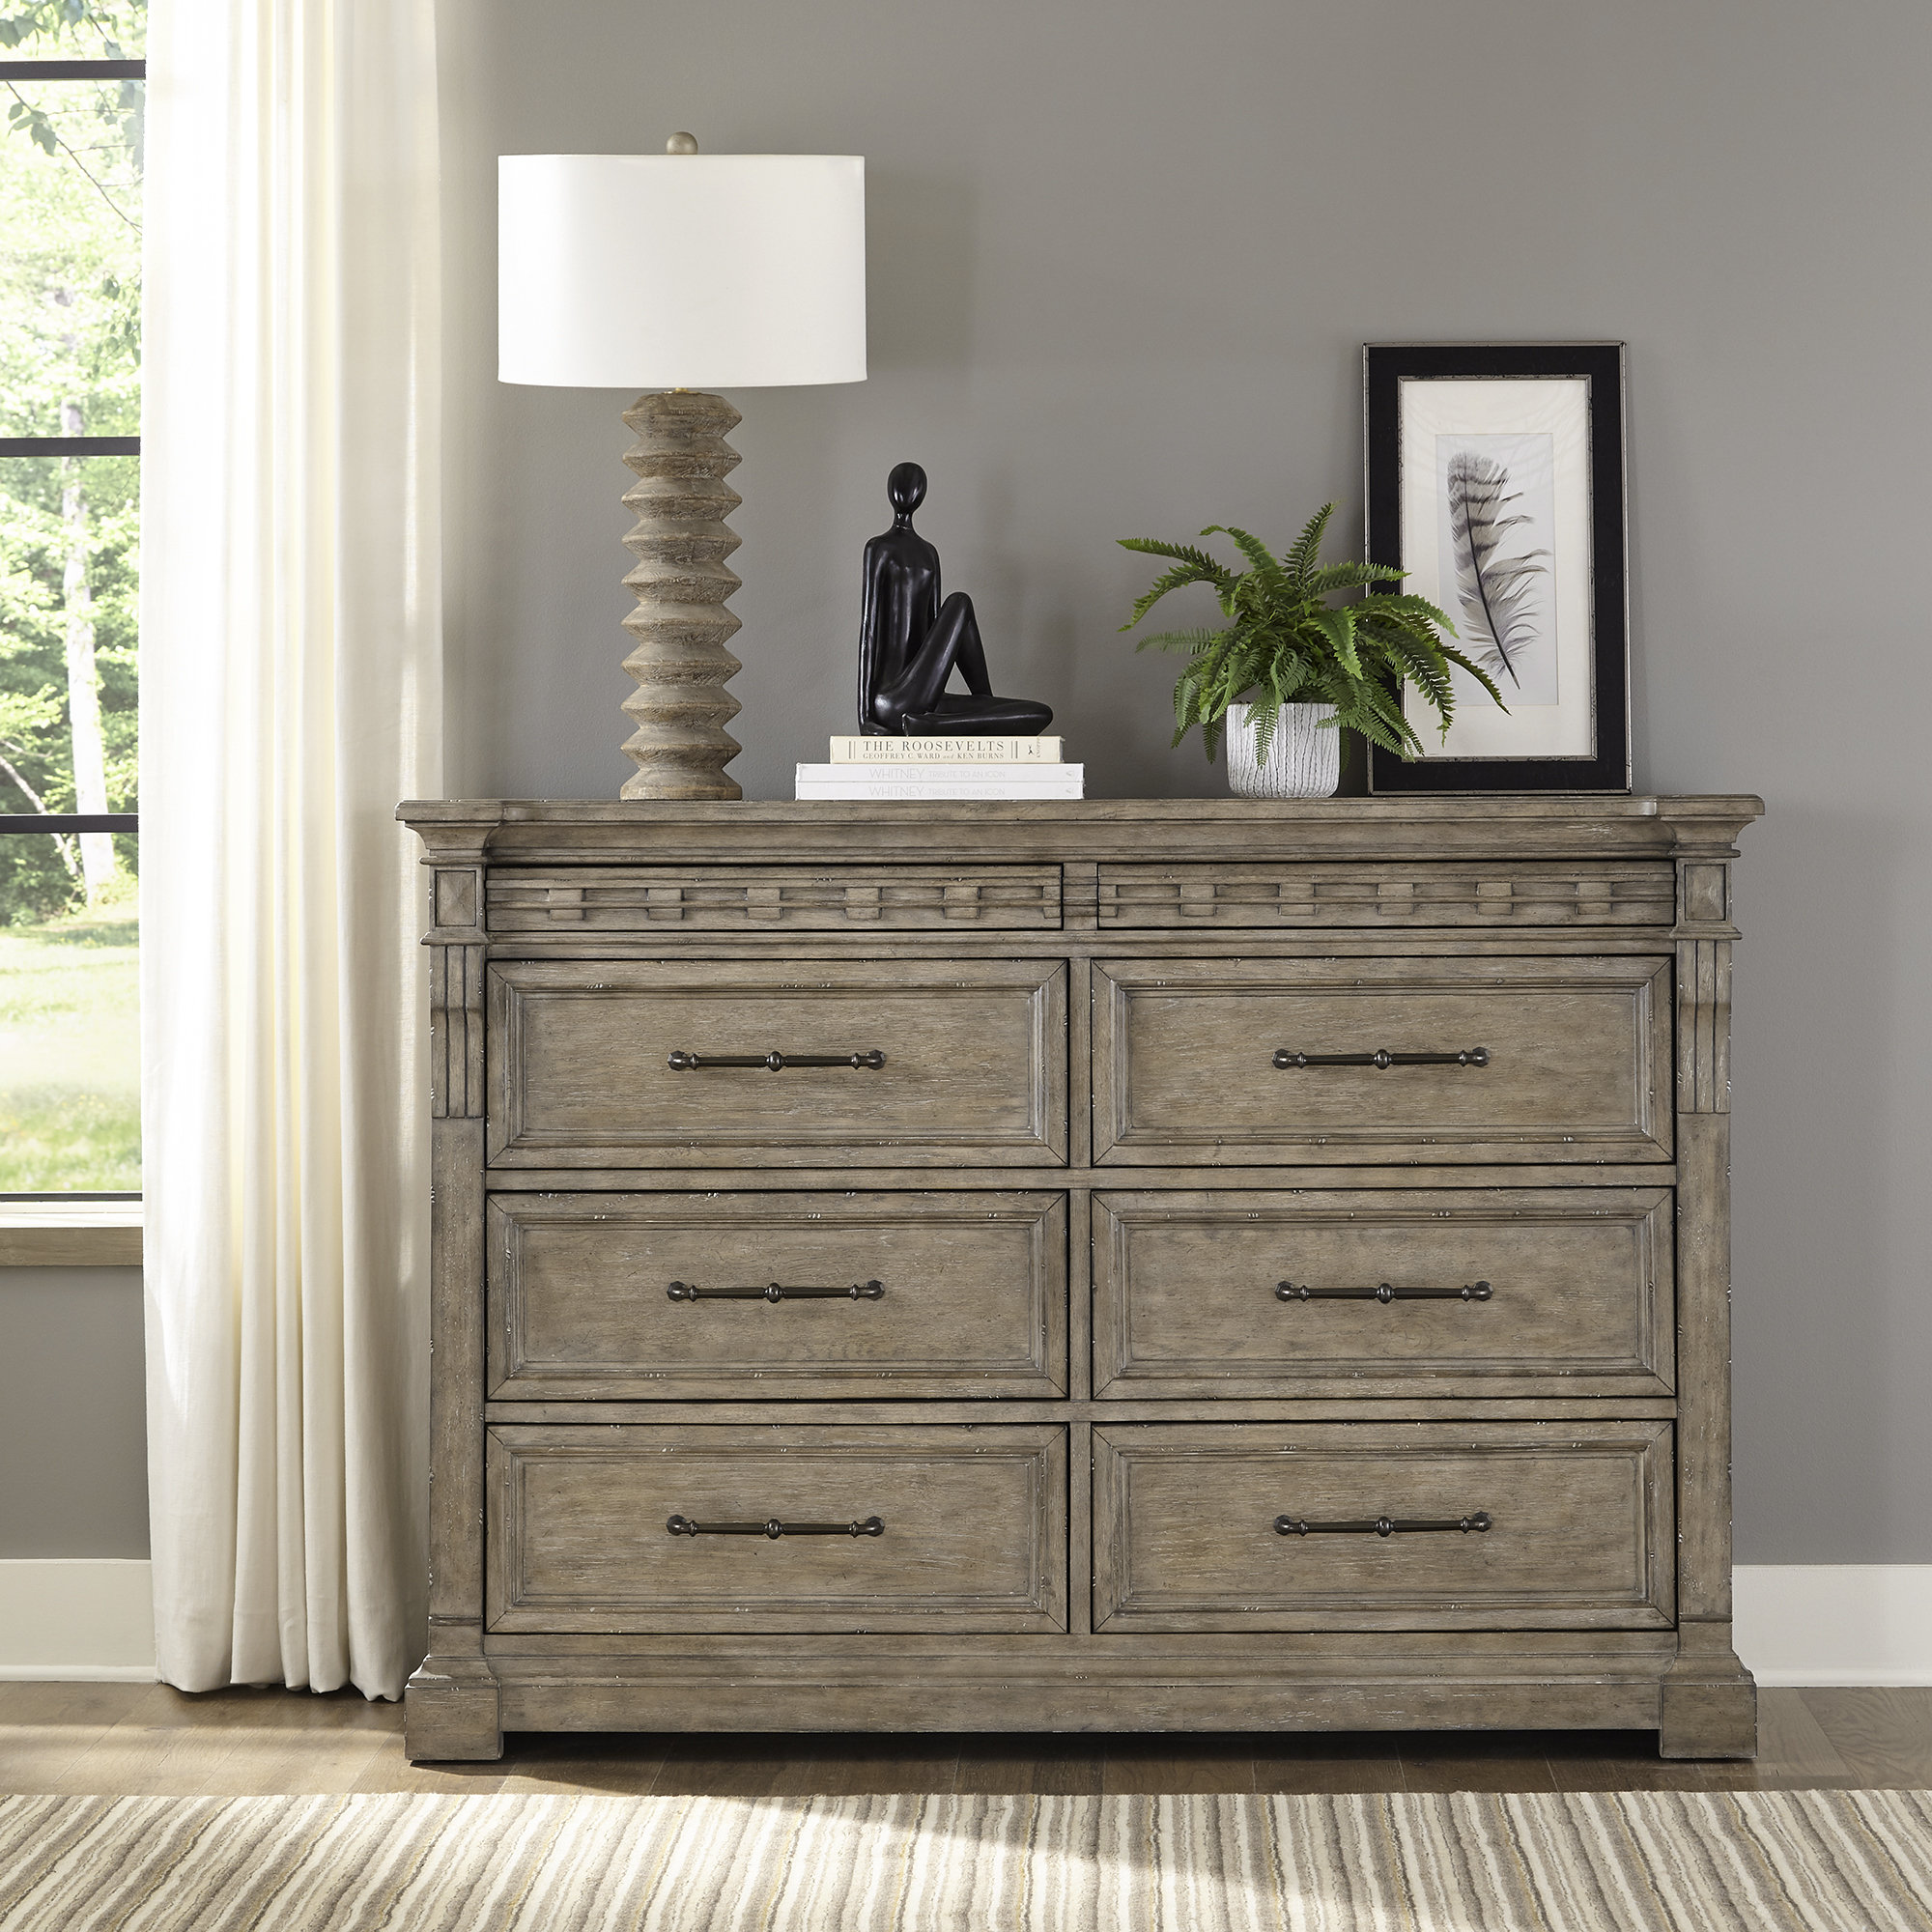 SOLD - Soft Taupe-Greige with Light Wood Top Lane Cedar Chest